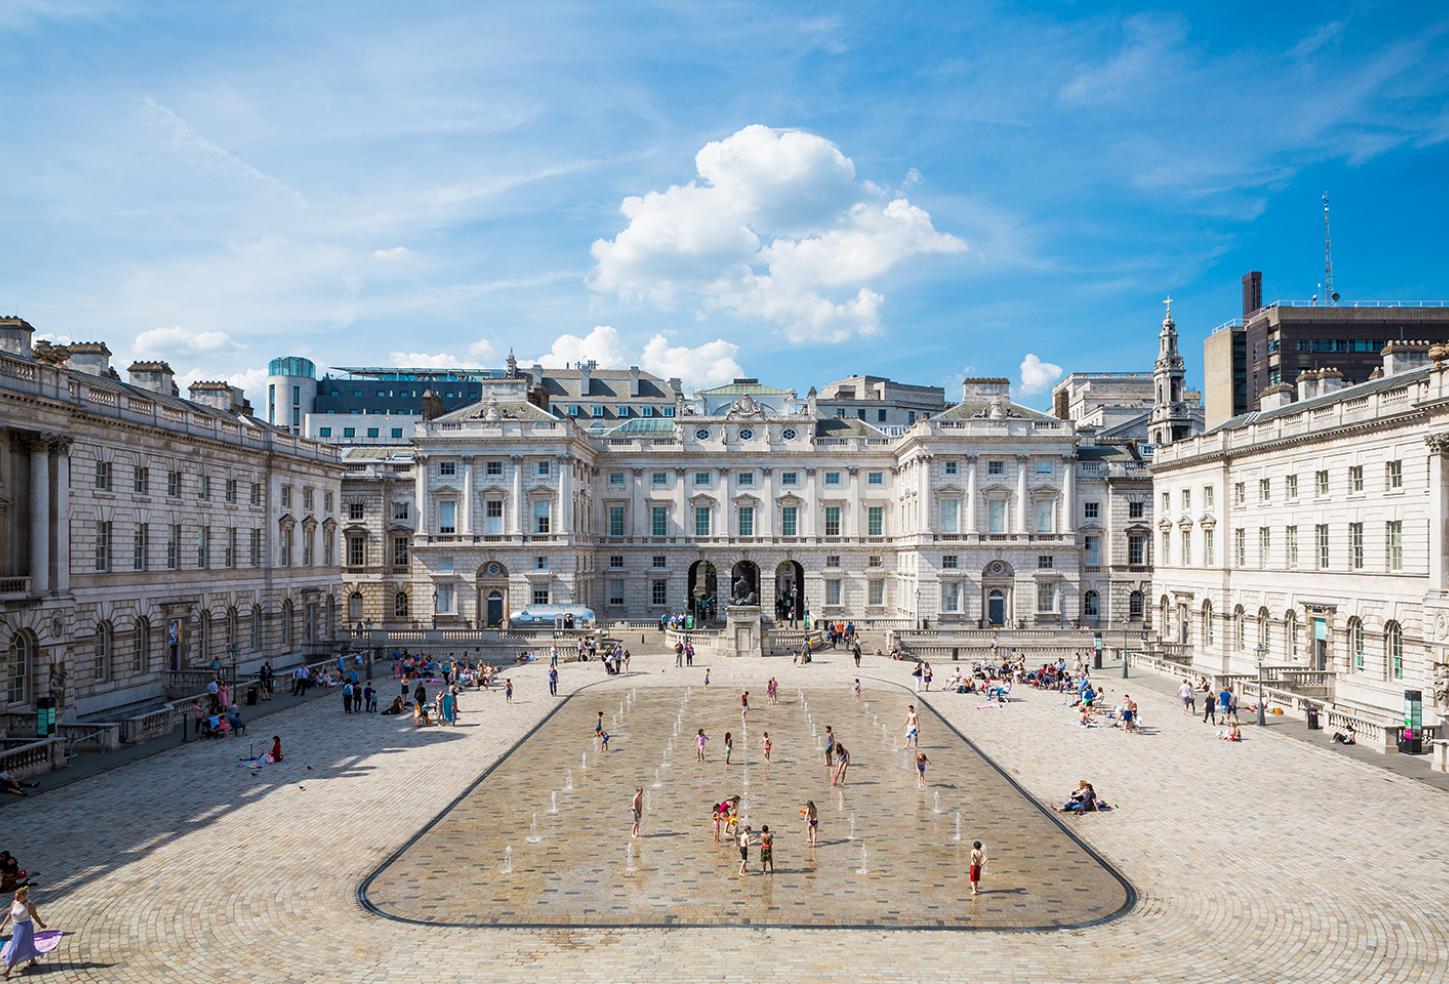 Plan your visit - The Edmond J. Safra Fountain Court, Somerset House, Image by Kevin Meredith